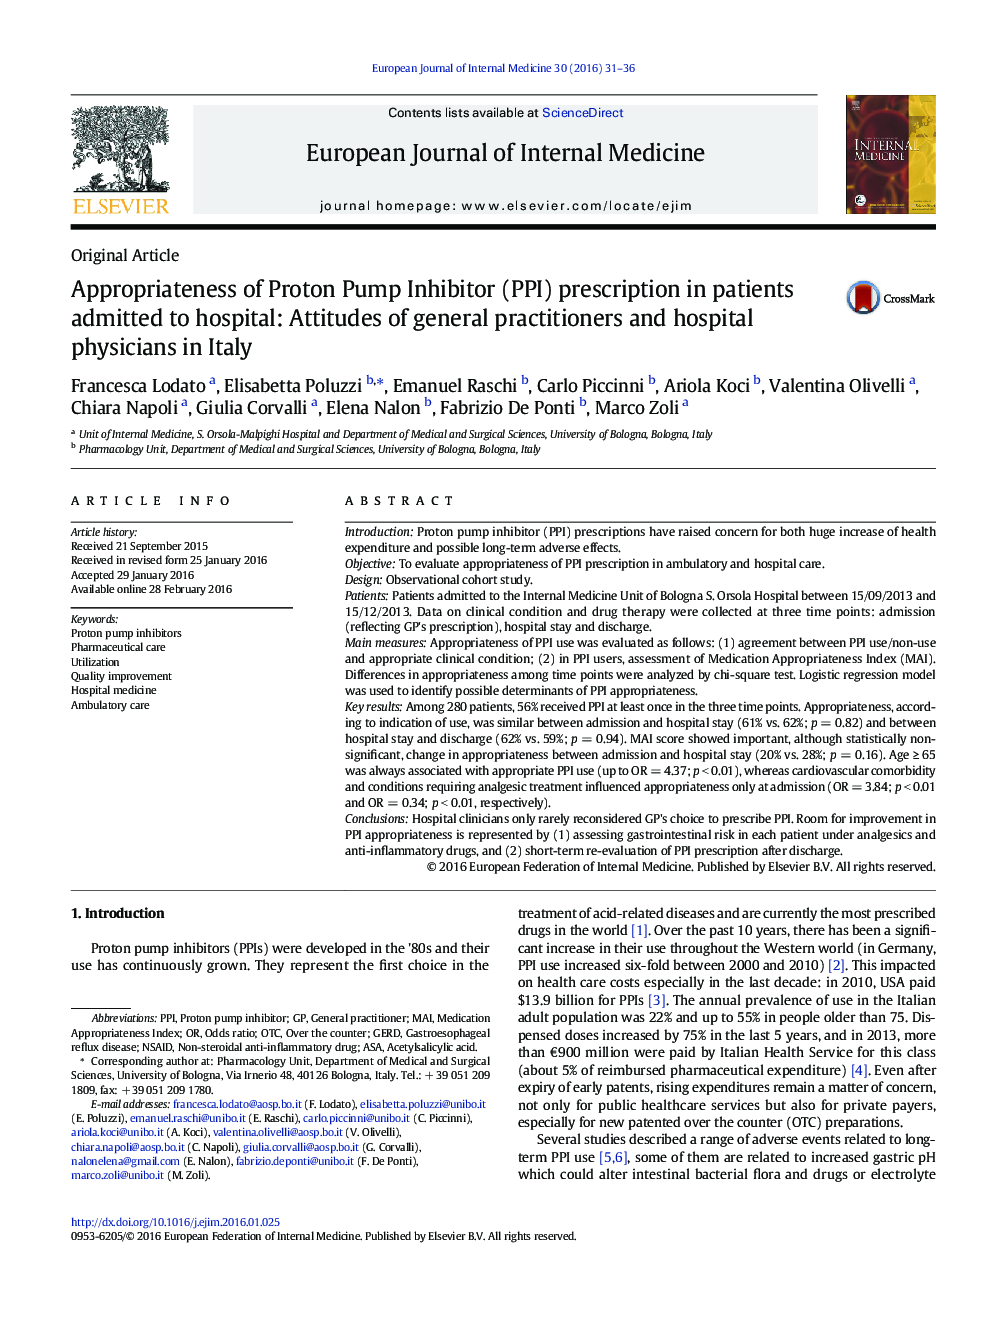 Appropriateness of Proton Pump Inhibitor (PPI) prescription in patients admitted to hospital: Attitudes of general practitioners and hospital physicians in Italy